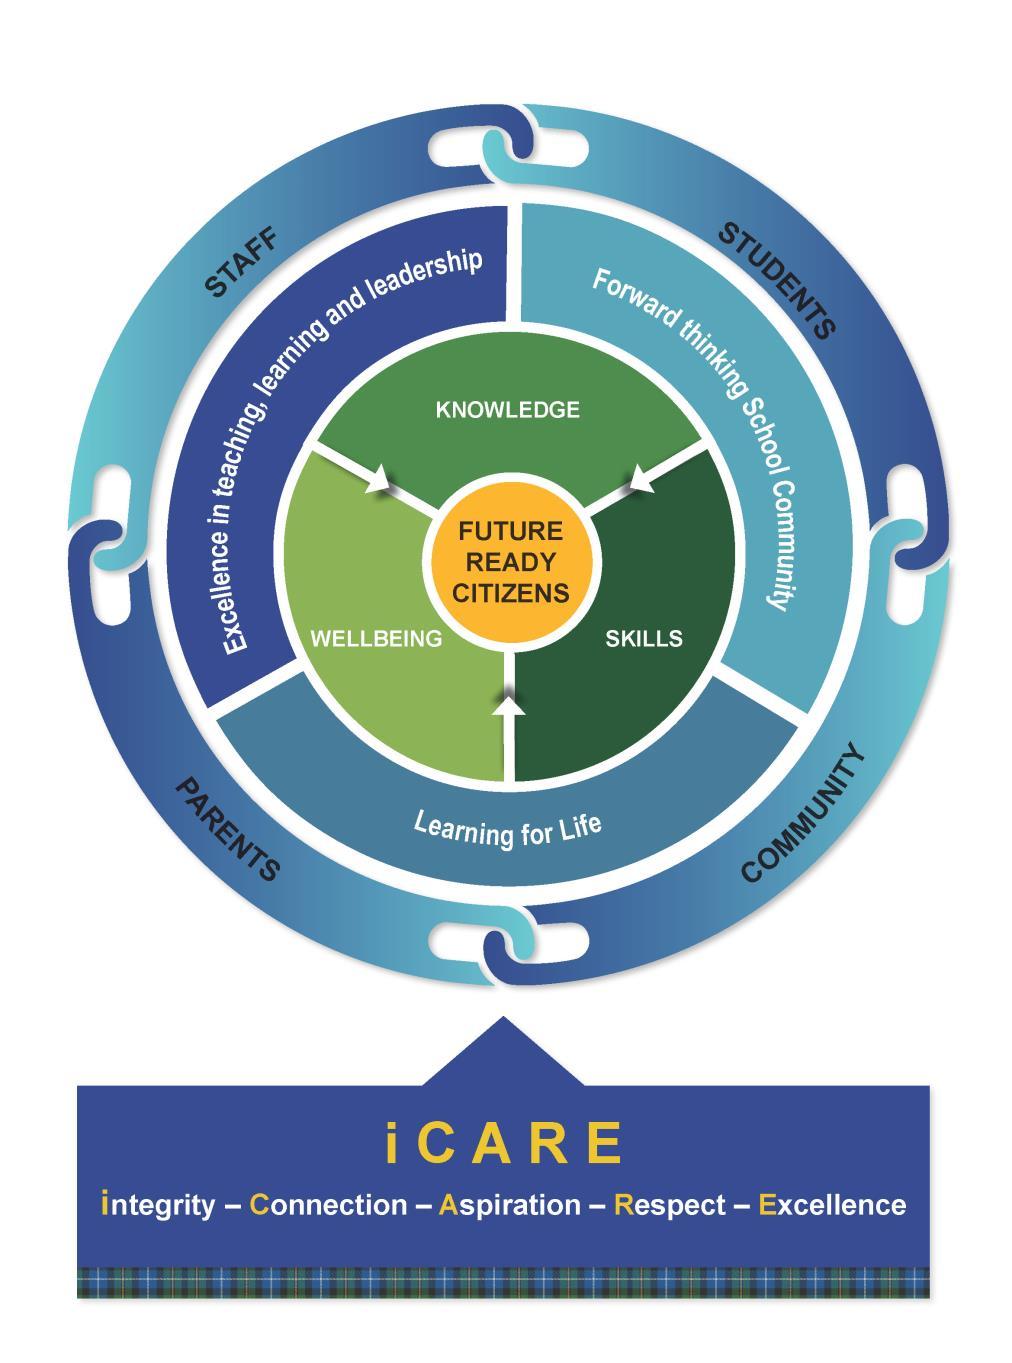 PRIORITIES We consider the relationship between parents, students, staff and community, essential to delivering the strategies within our three interconnected priority areas.